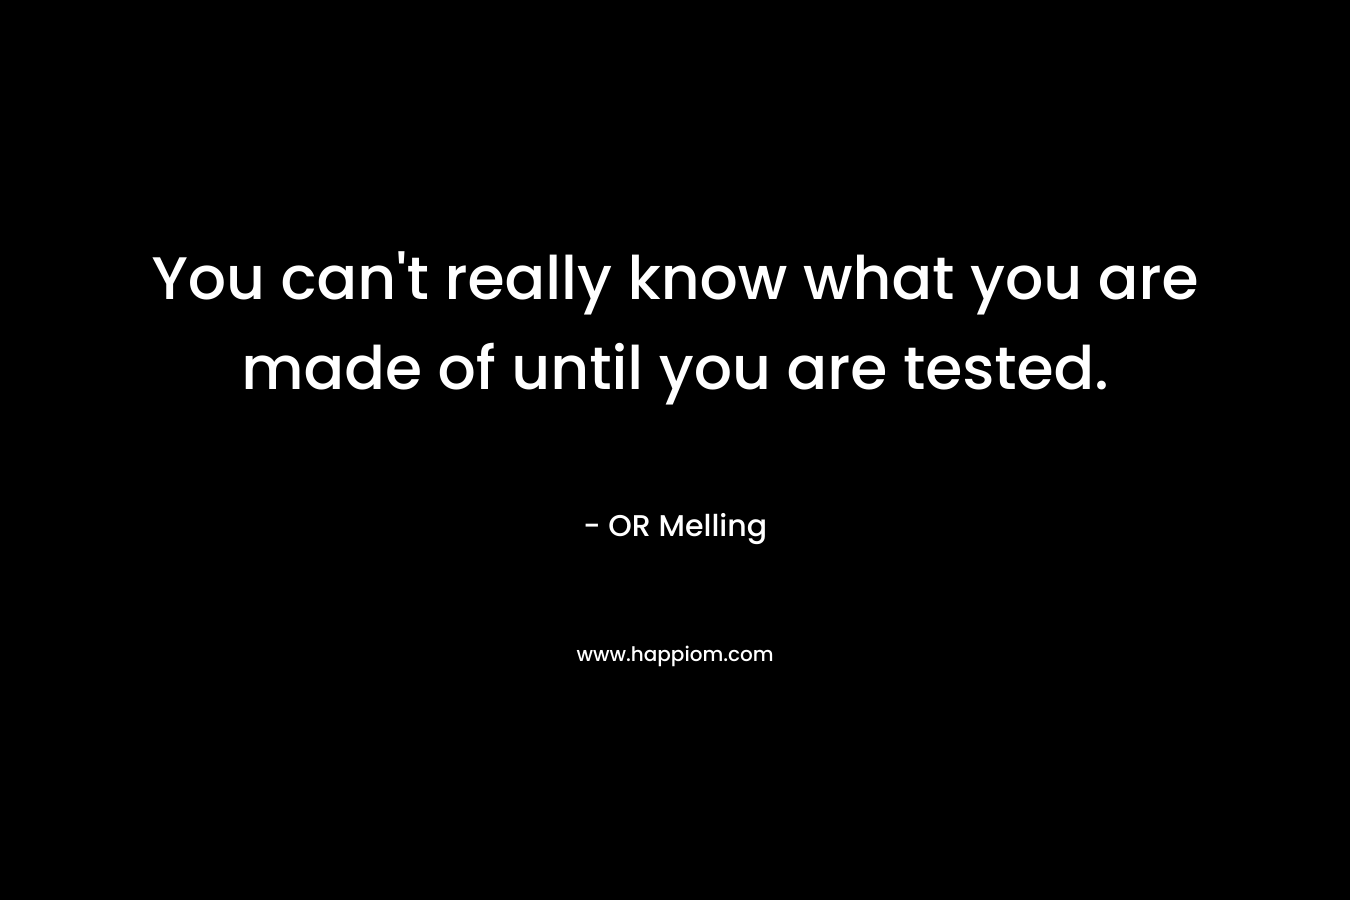 You can’t really know what you are made of until you are tested. – OR Melling